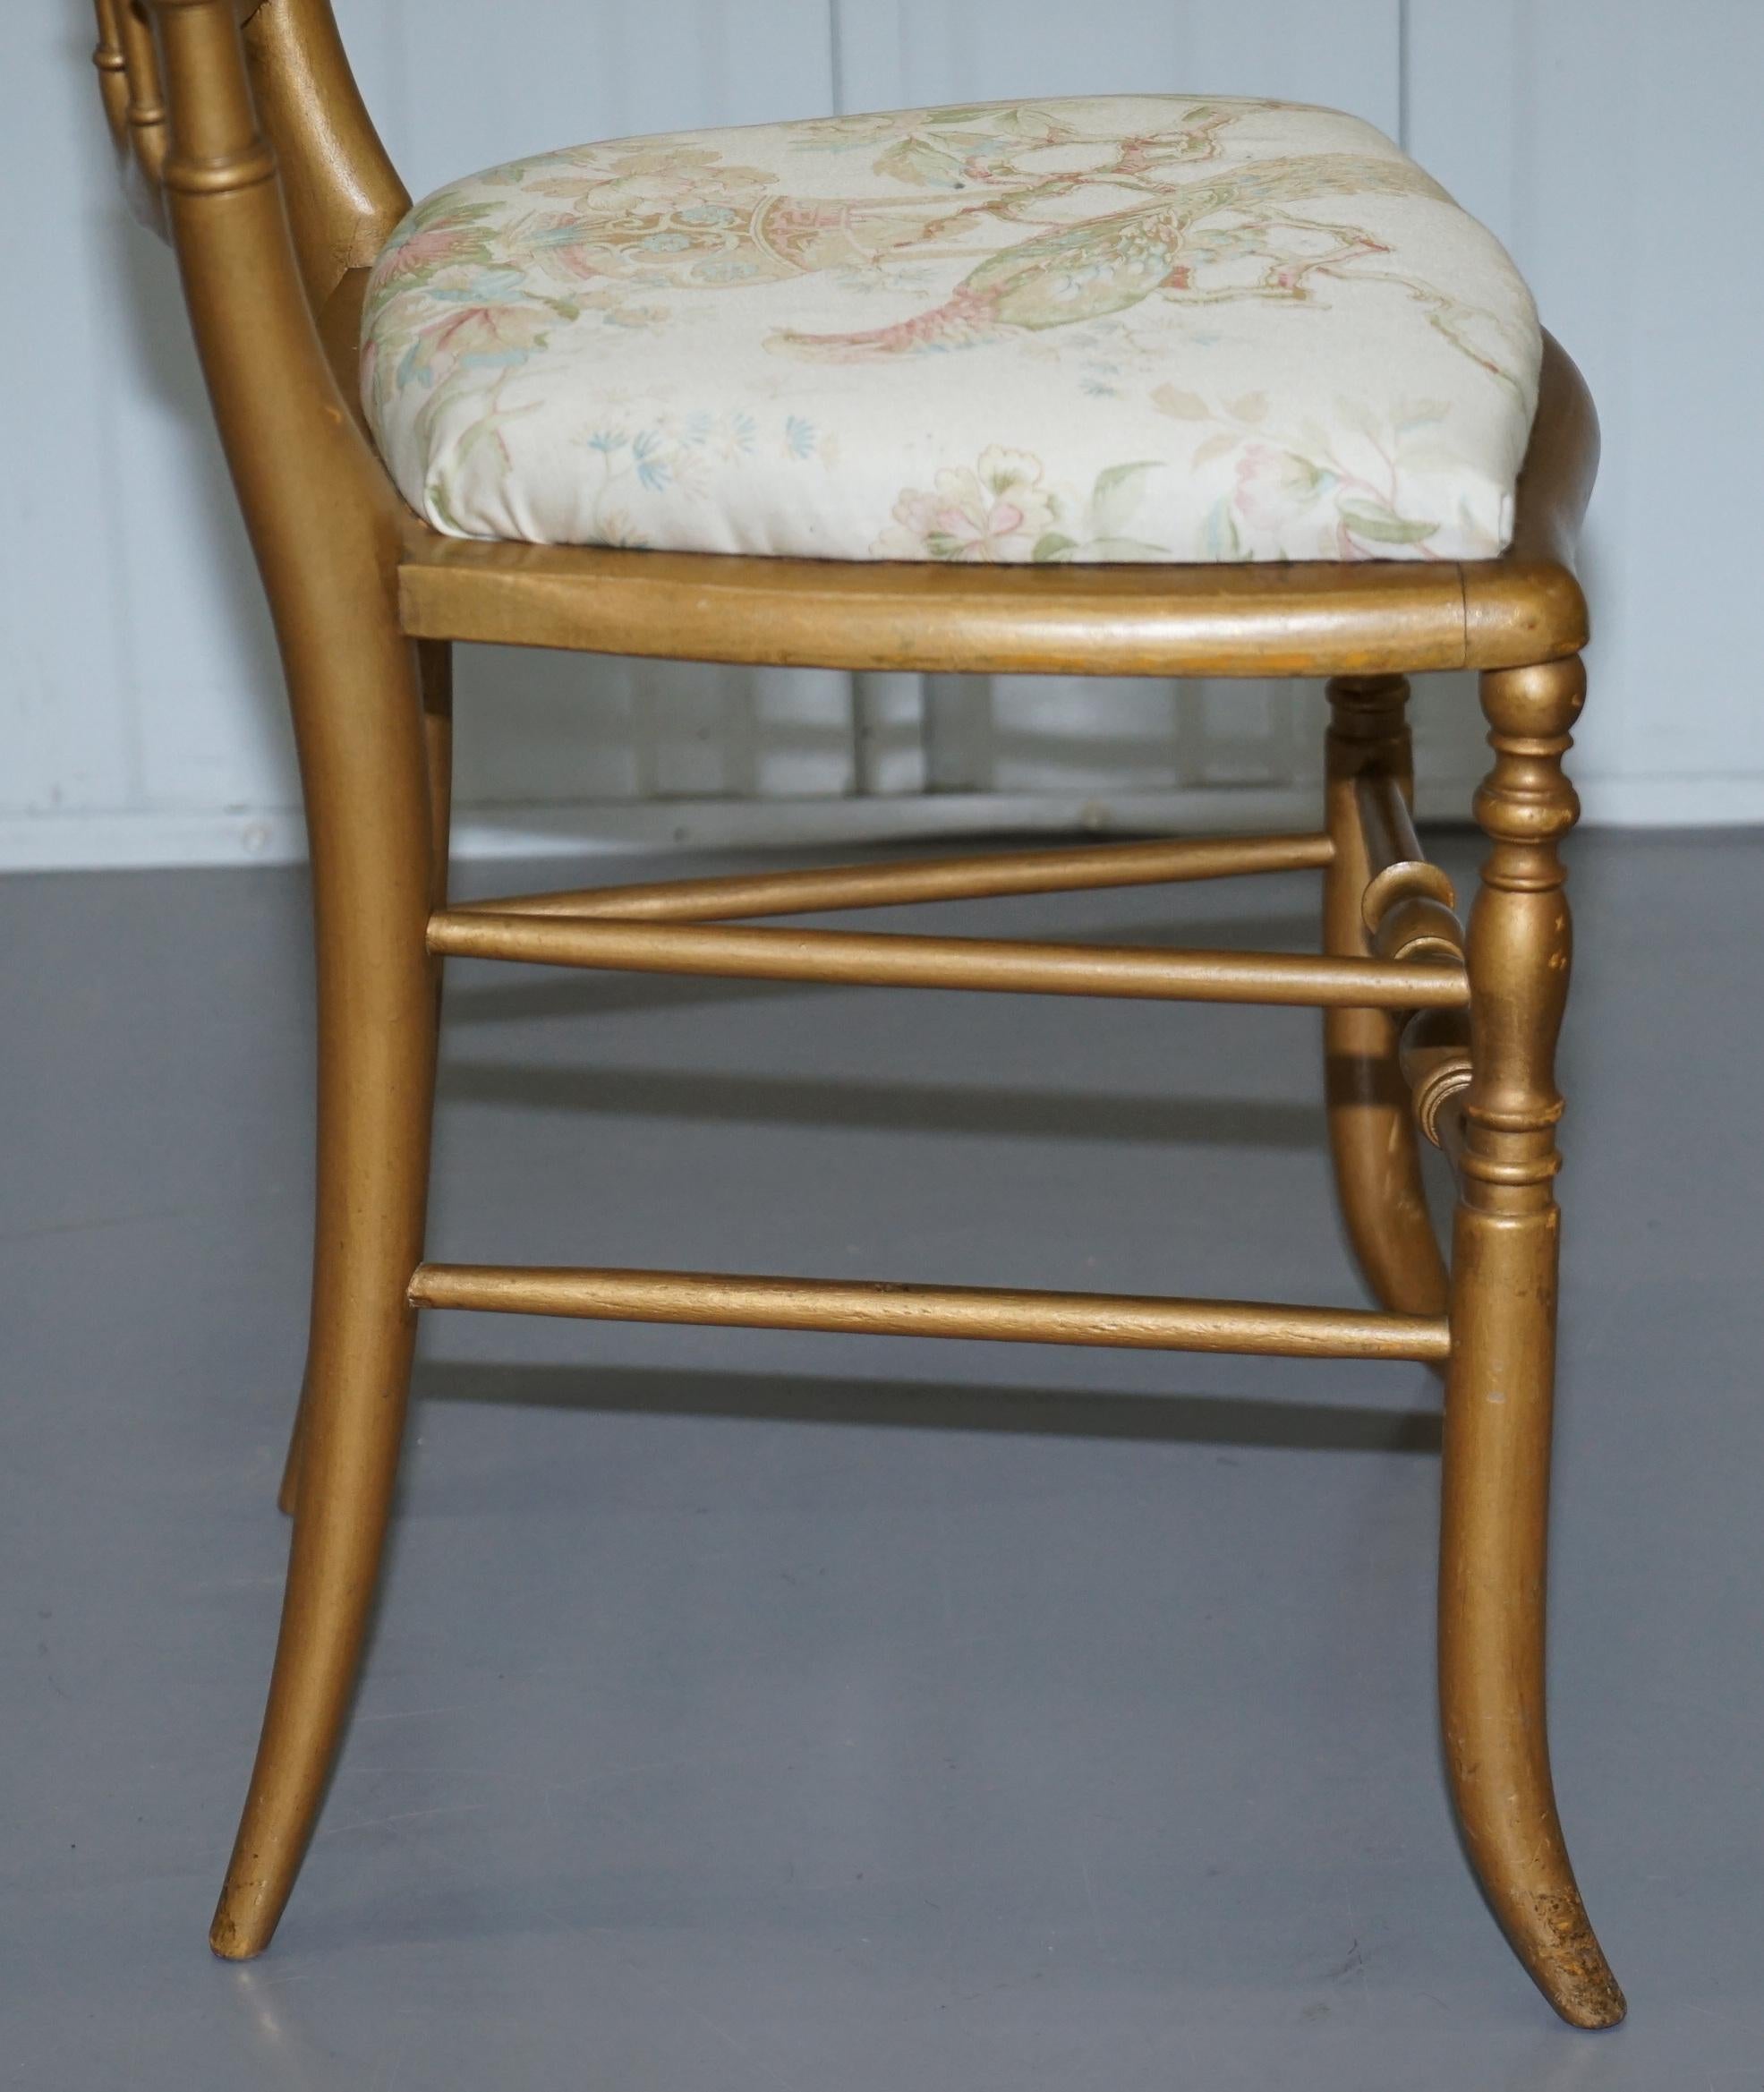 Regency Style Gold Giltwood Spindle Chair circa 1900 Ornate Bird Upholstery For Sale 4